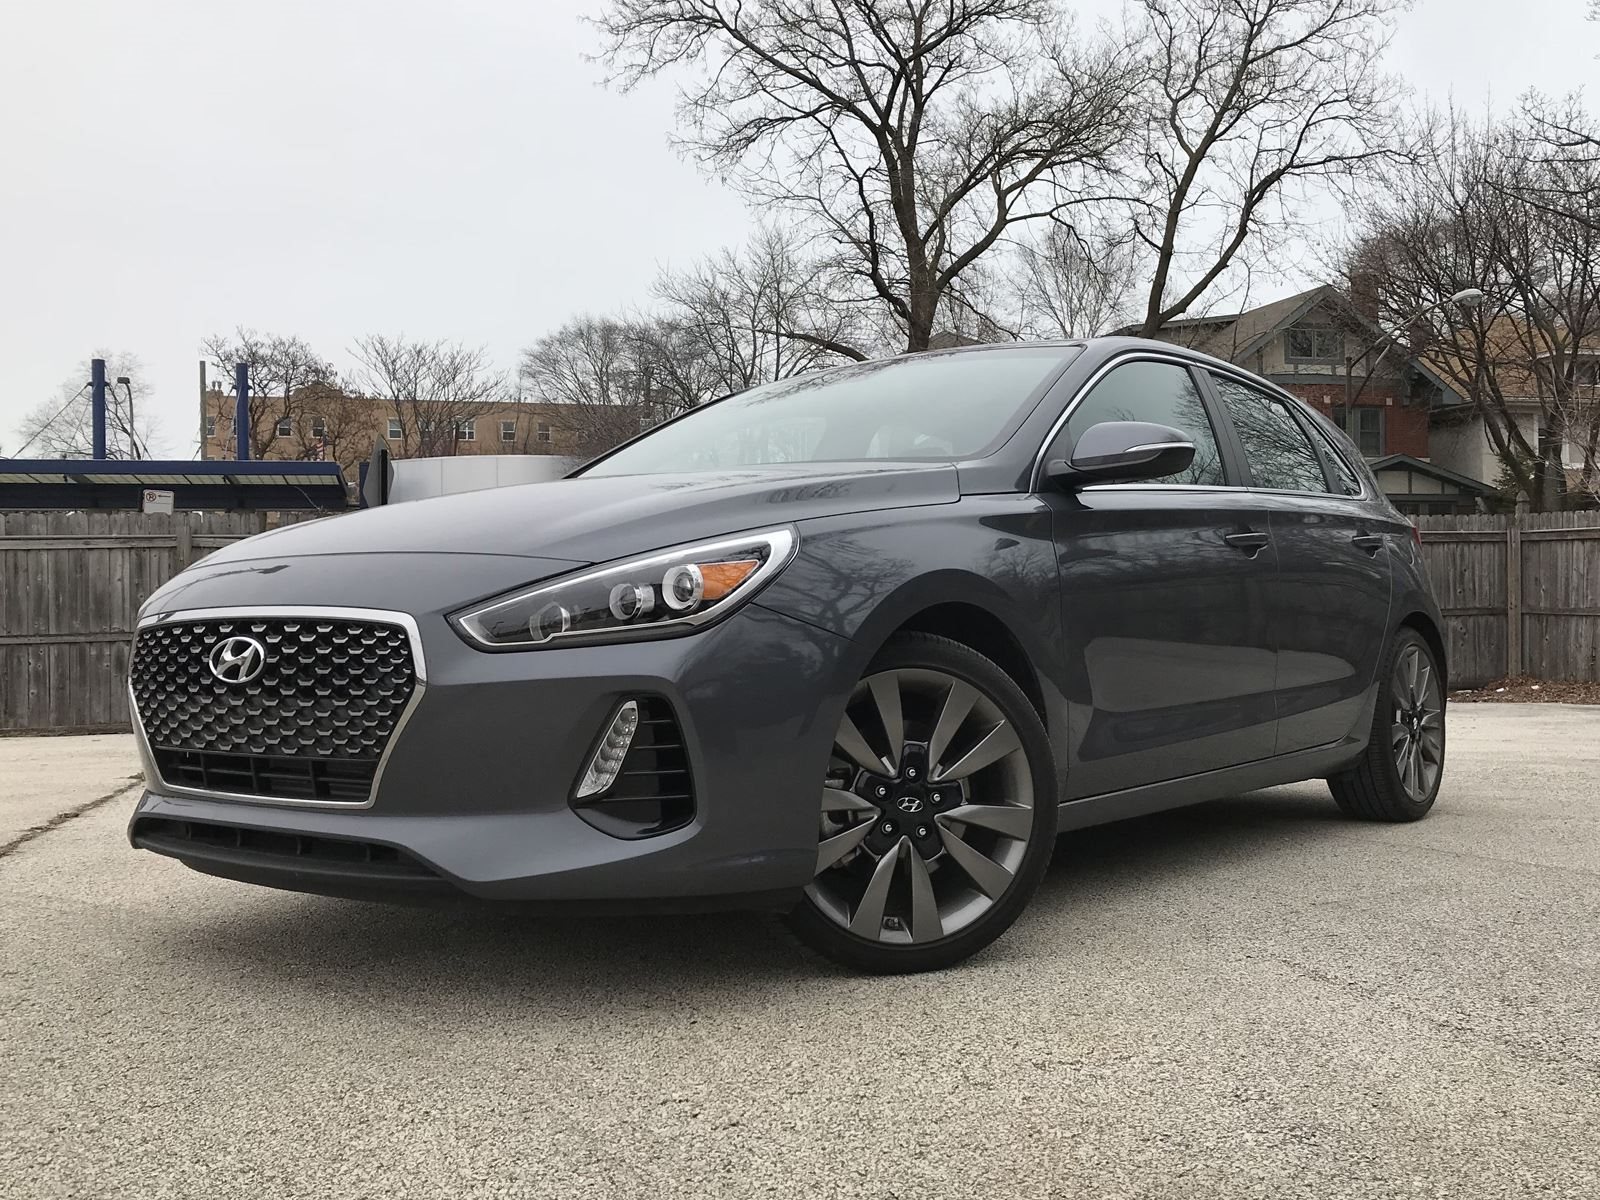 2018 Hyundai Elantra GT Test Drive Review: A Grown-Up Hatchback That's Just  Hot Enough | CarBuzz